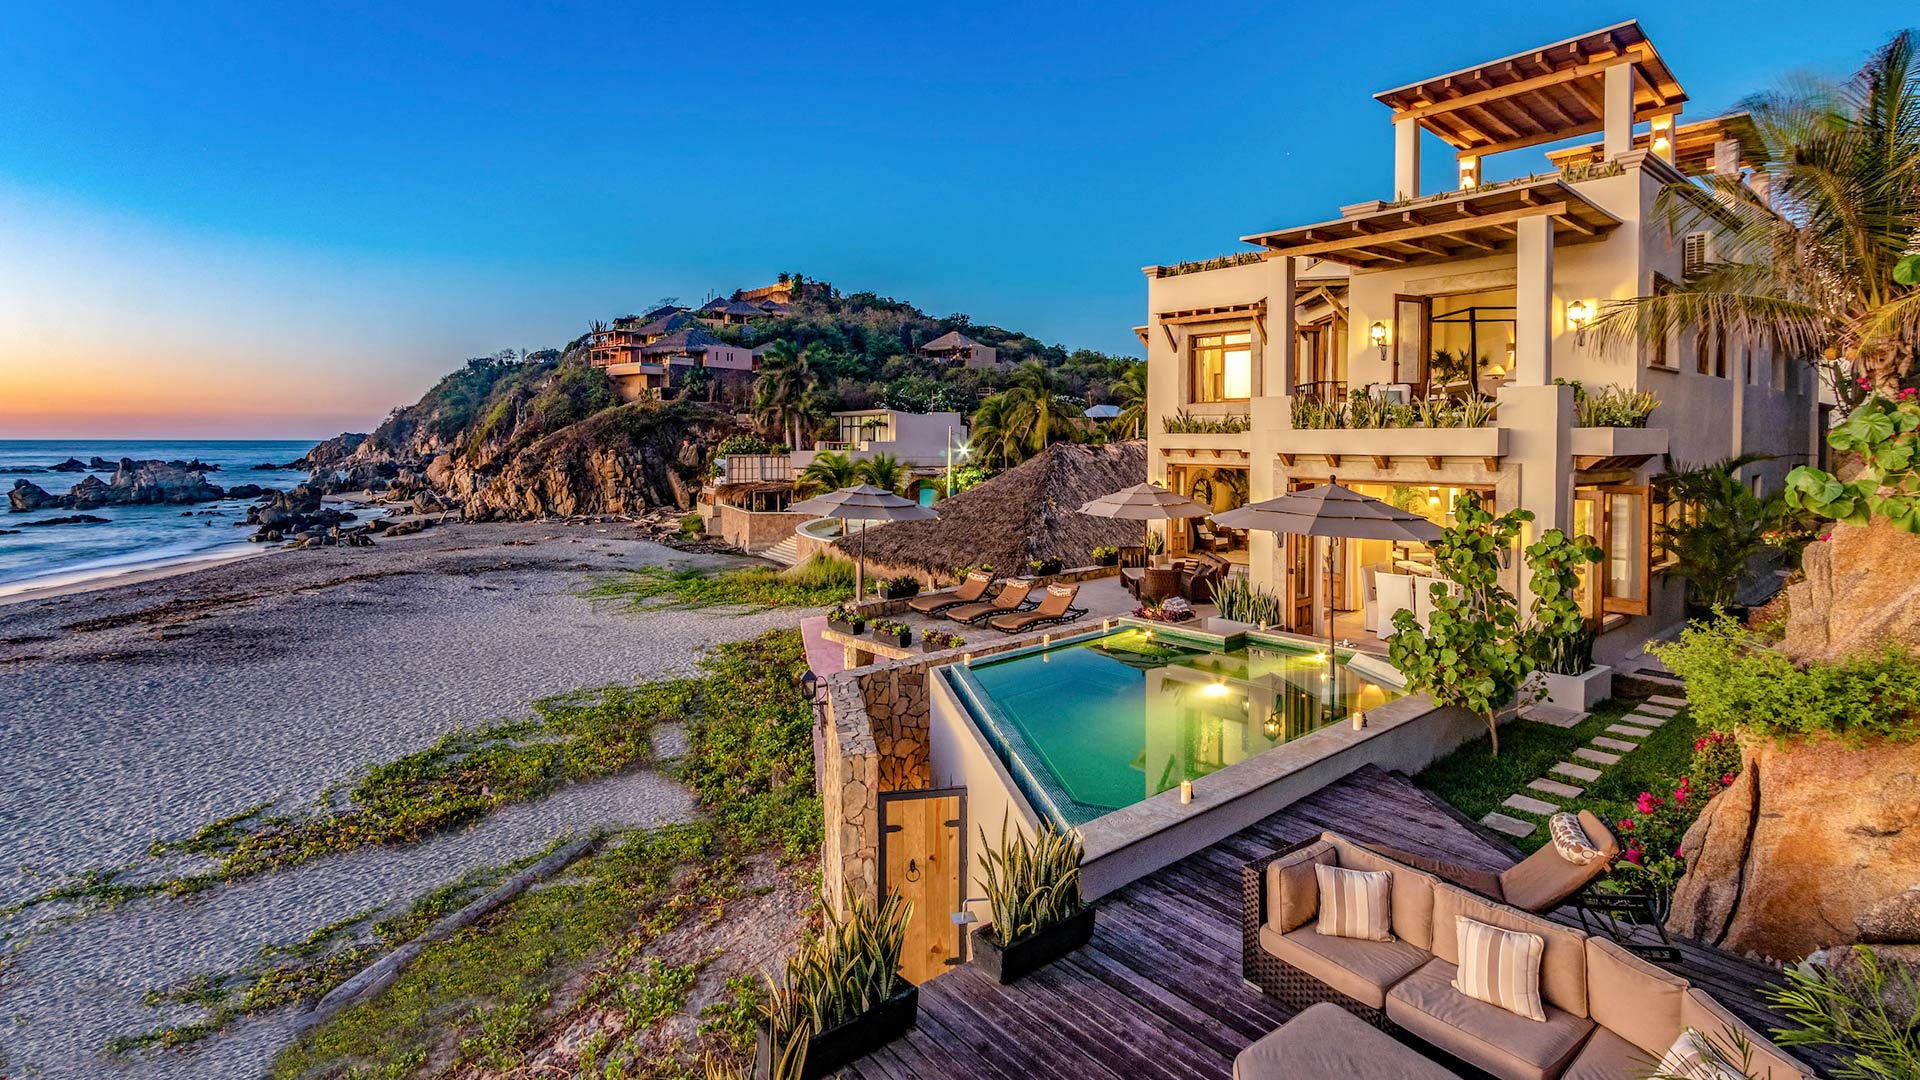 Does Your Dream Vacay Home Rock Pool or Beach Vibes? These 9 Stunners Will  Help You Decide